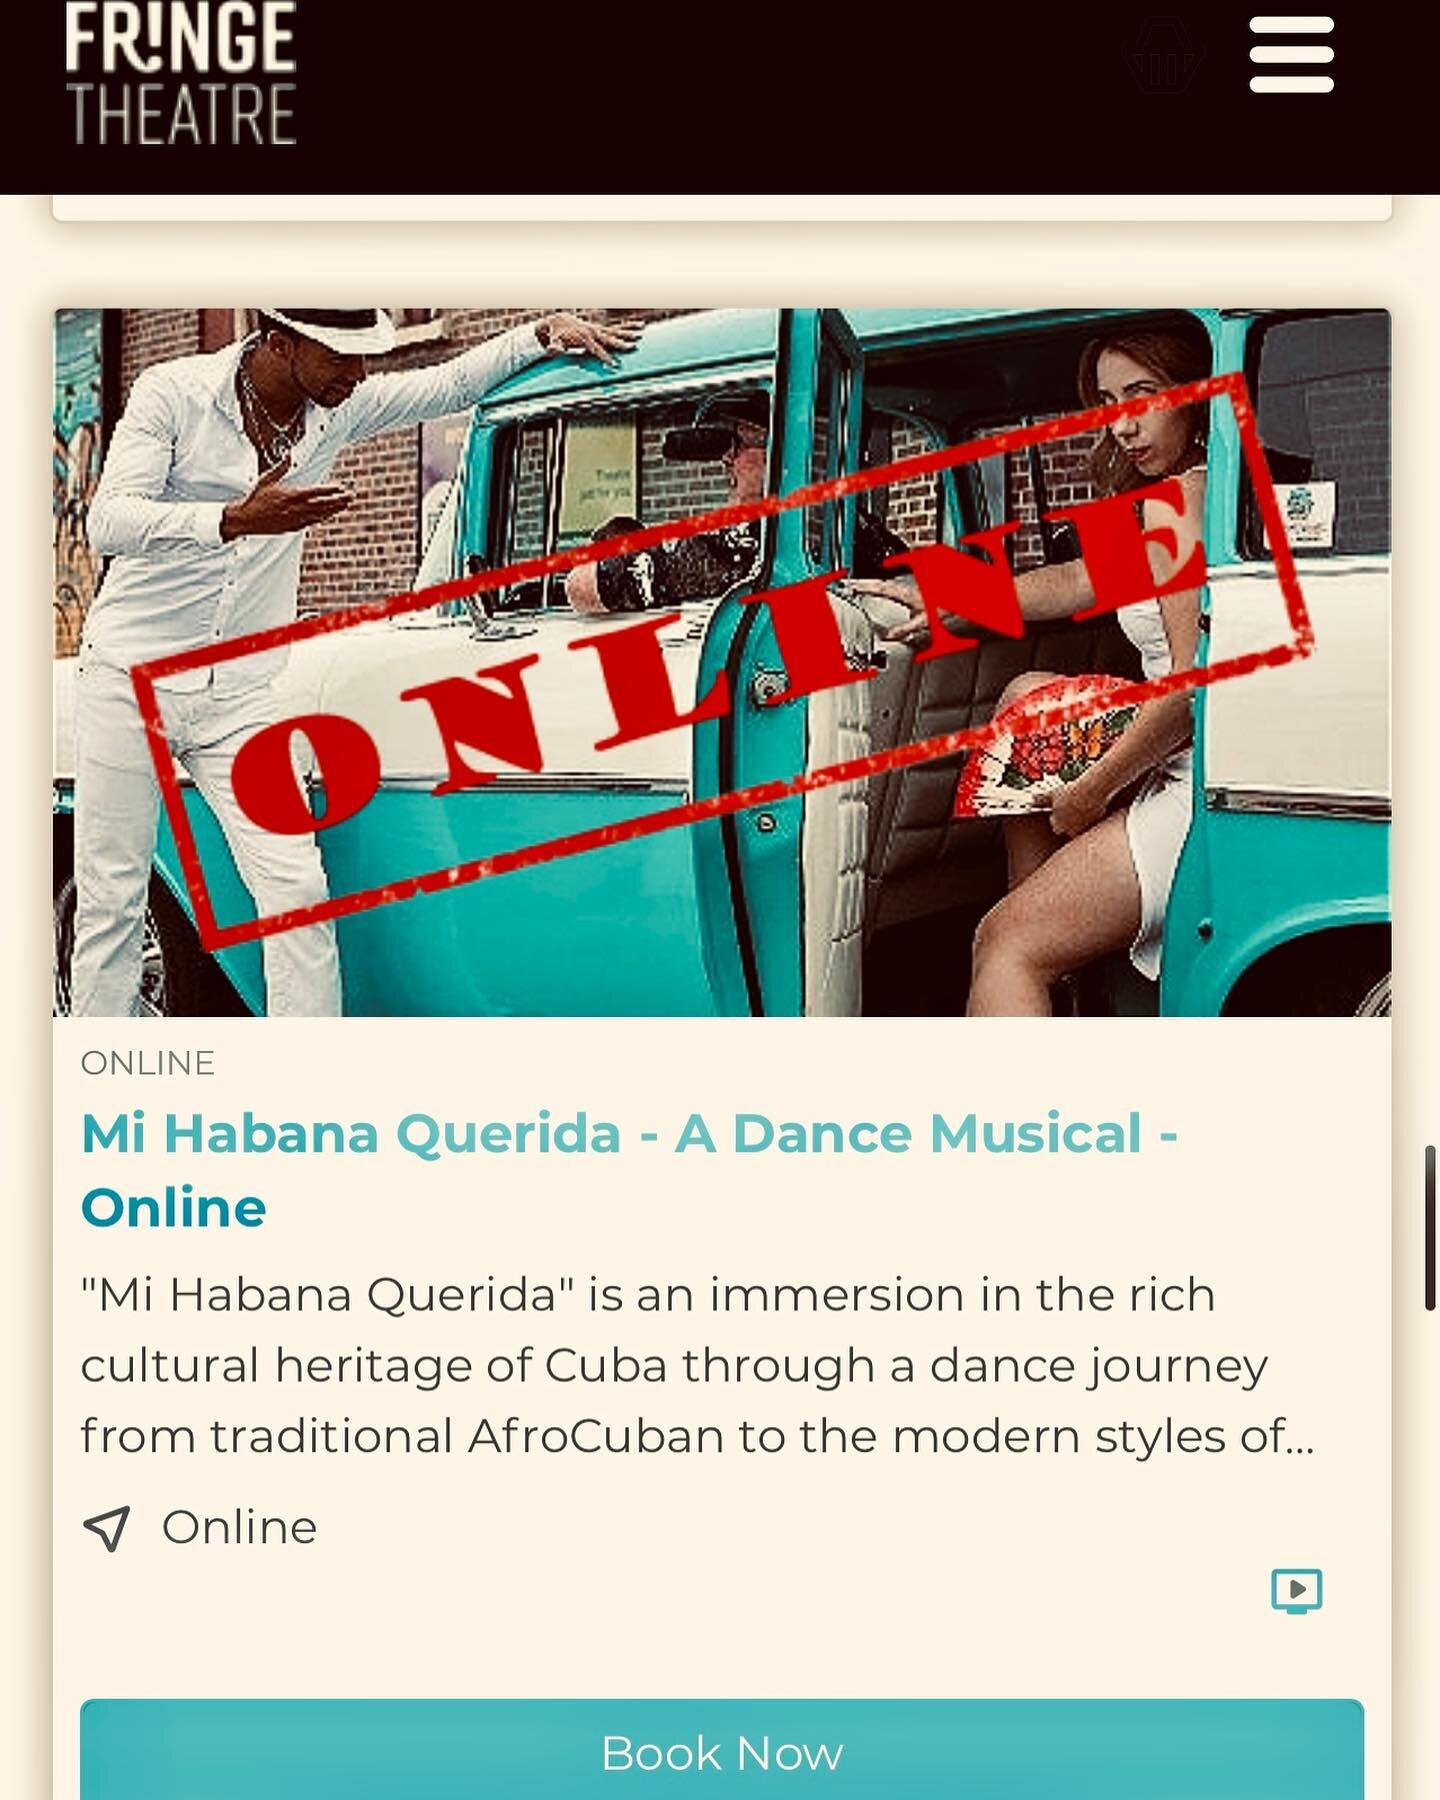 We are beyond excited to be one of the &ldquo;digital holdovers&rdquo; of the 40th edition of the @edmontonfringe festival!!!

STREAM ONLINE SHOWS UNTIL 11:59 PM ON AUGUST 31ST. 

Tickets available at tickets.fringetheatre.ca

#mihabanaquerida #cuban